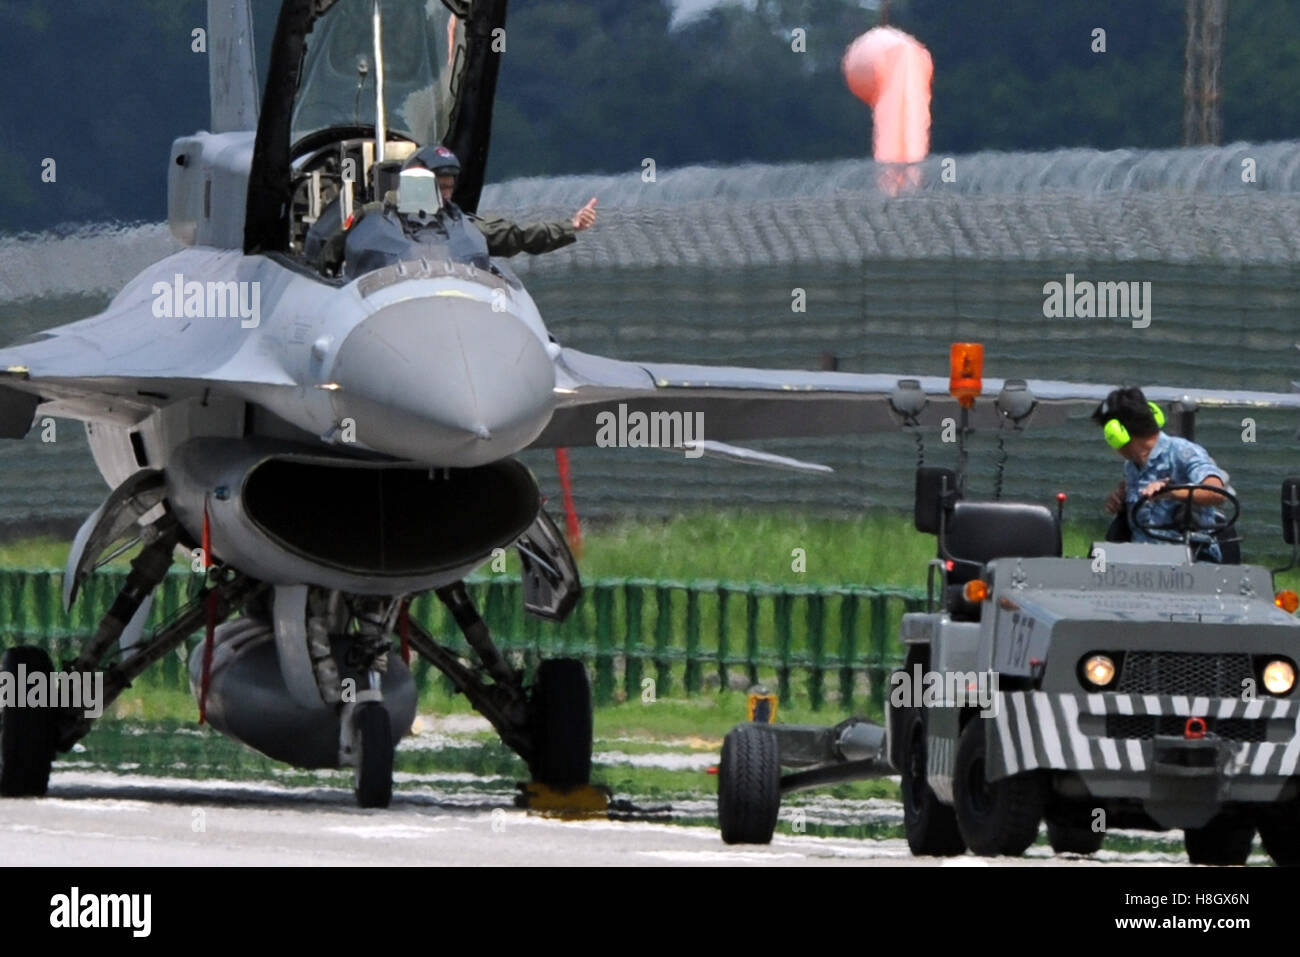 Singapore. 12th Nov, 2016. An F-16 fighter plane's pilot gives a thumbs-up during a rehearsal of exercise Torrent on Singapore's Lim Chu Kang road, Nov. 12, 2016. The Republic of Singapore Air Force (RSAF) Sunday conducted exercise Torrent, in which a public road was converted into a runway for aircraft take-off and landing. The alternate runway exercise, which was last conducted in 2008 and now is in its seventh edition, aims to increase RSAF's aircraft take-off and landing capability. © Then Chih Wey/Xinhua/Alamy Live News Stock Photo